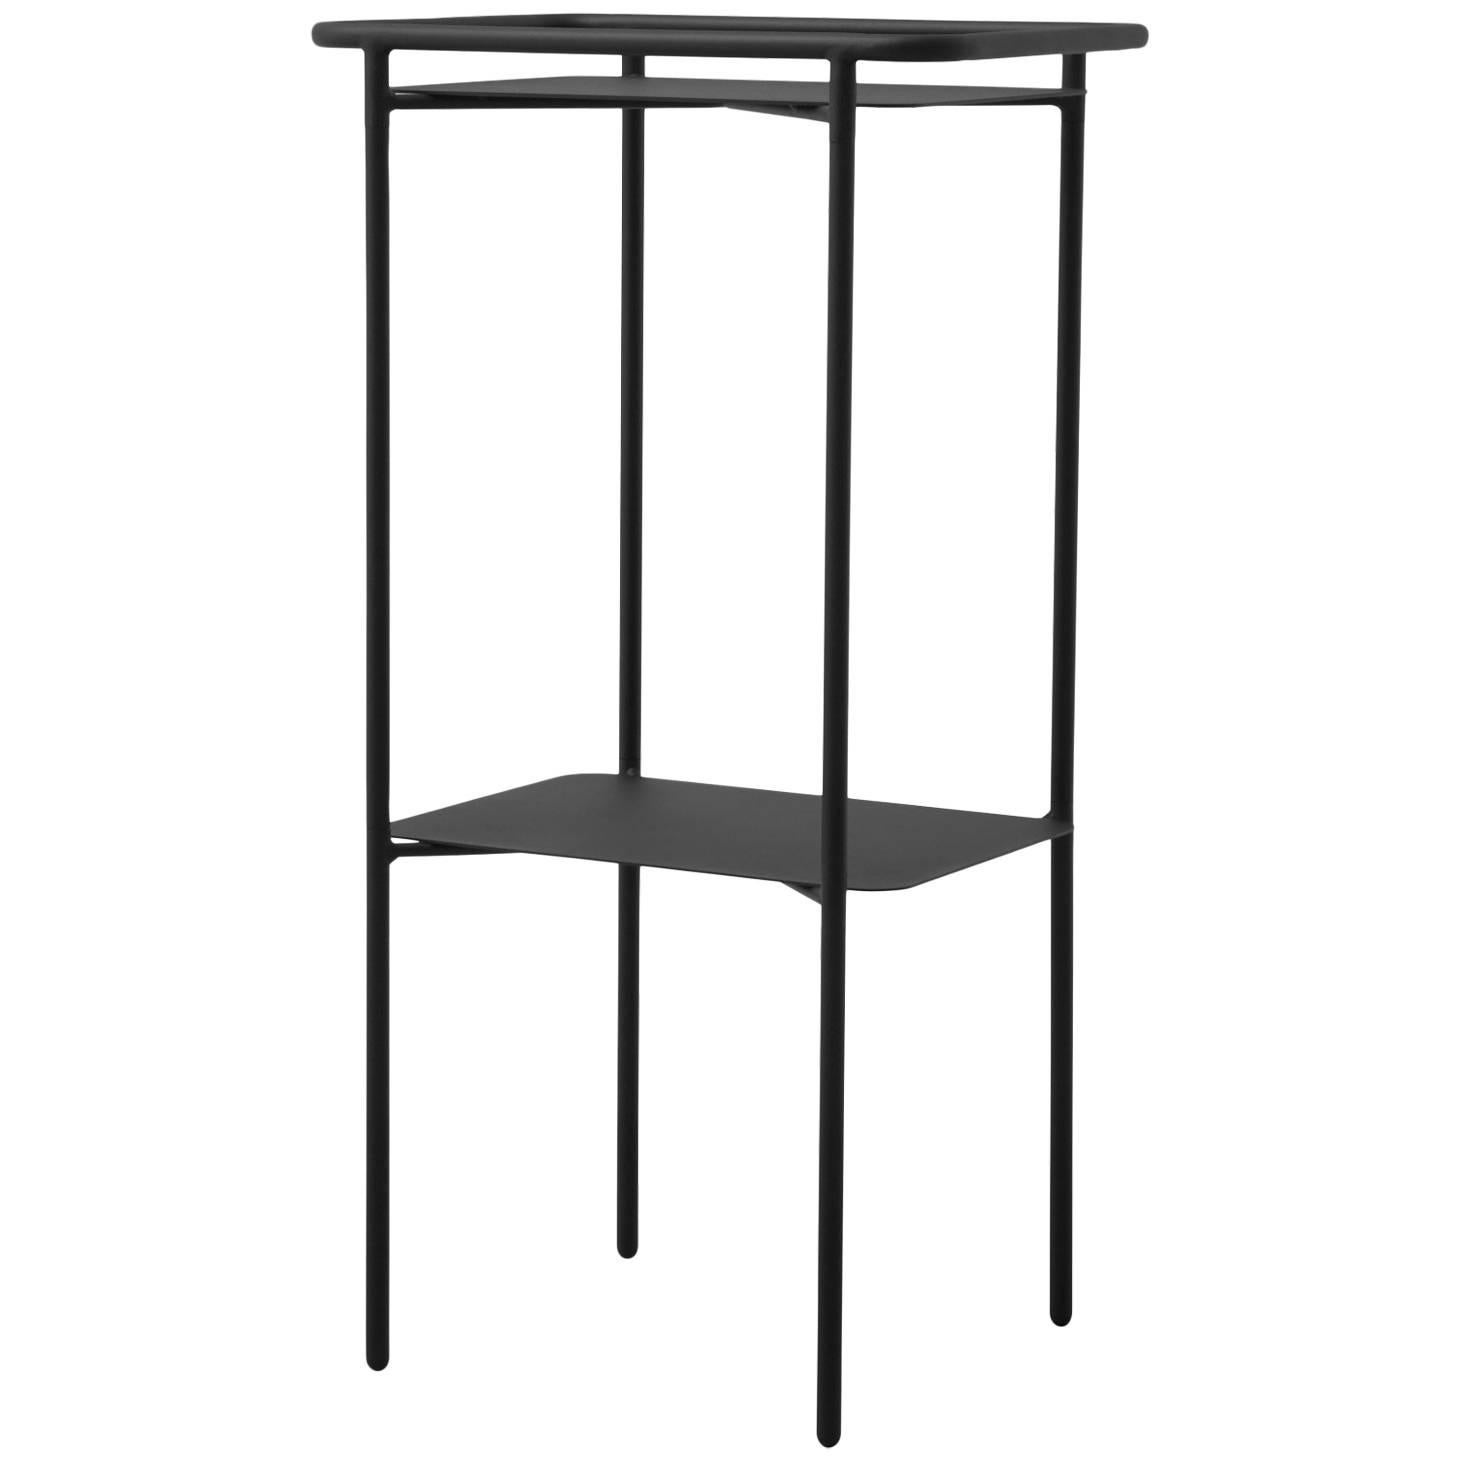 Copenhagen Tray Table by Norm Architects, in Black Steel